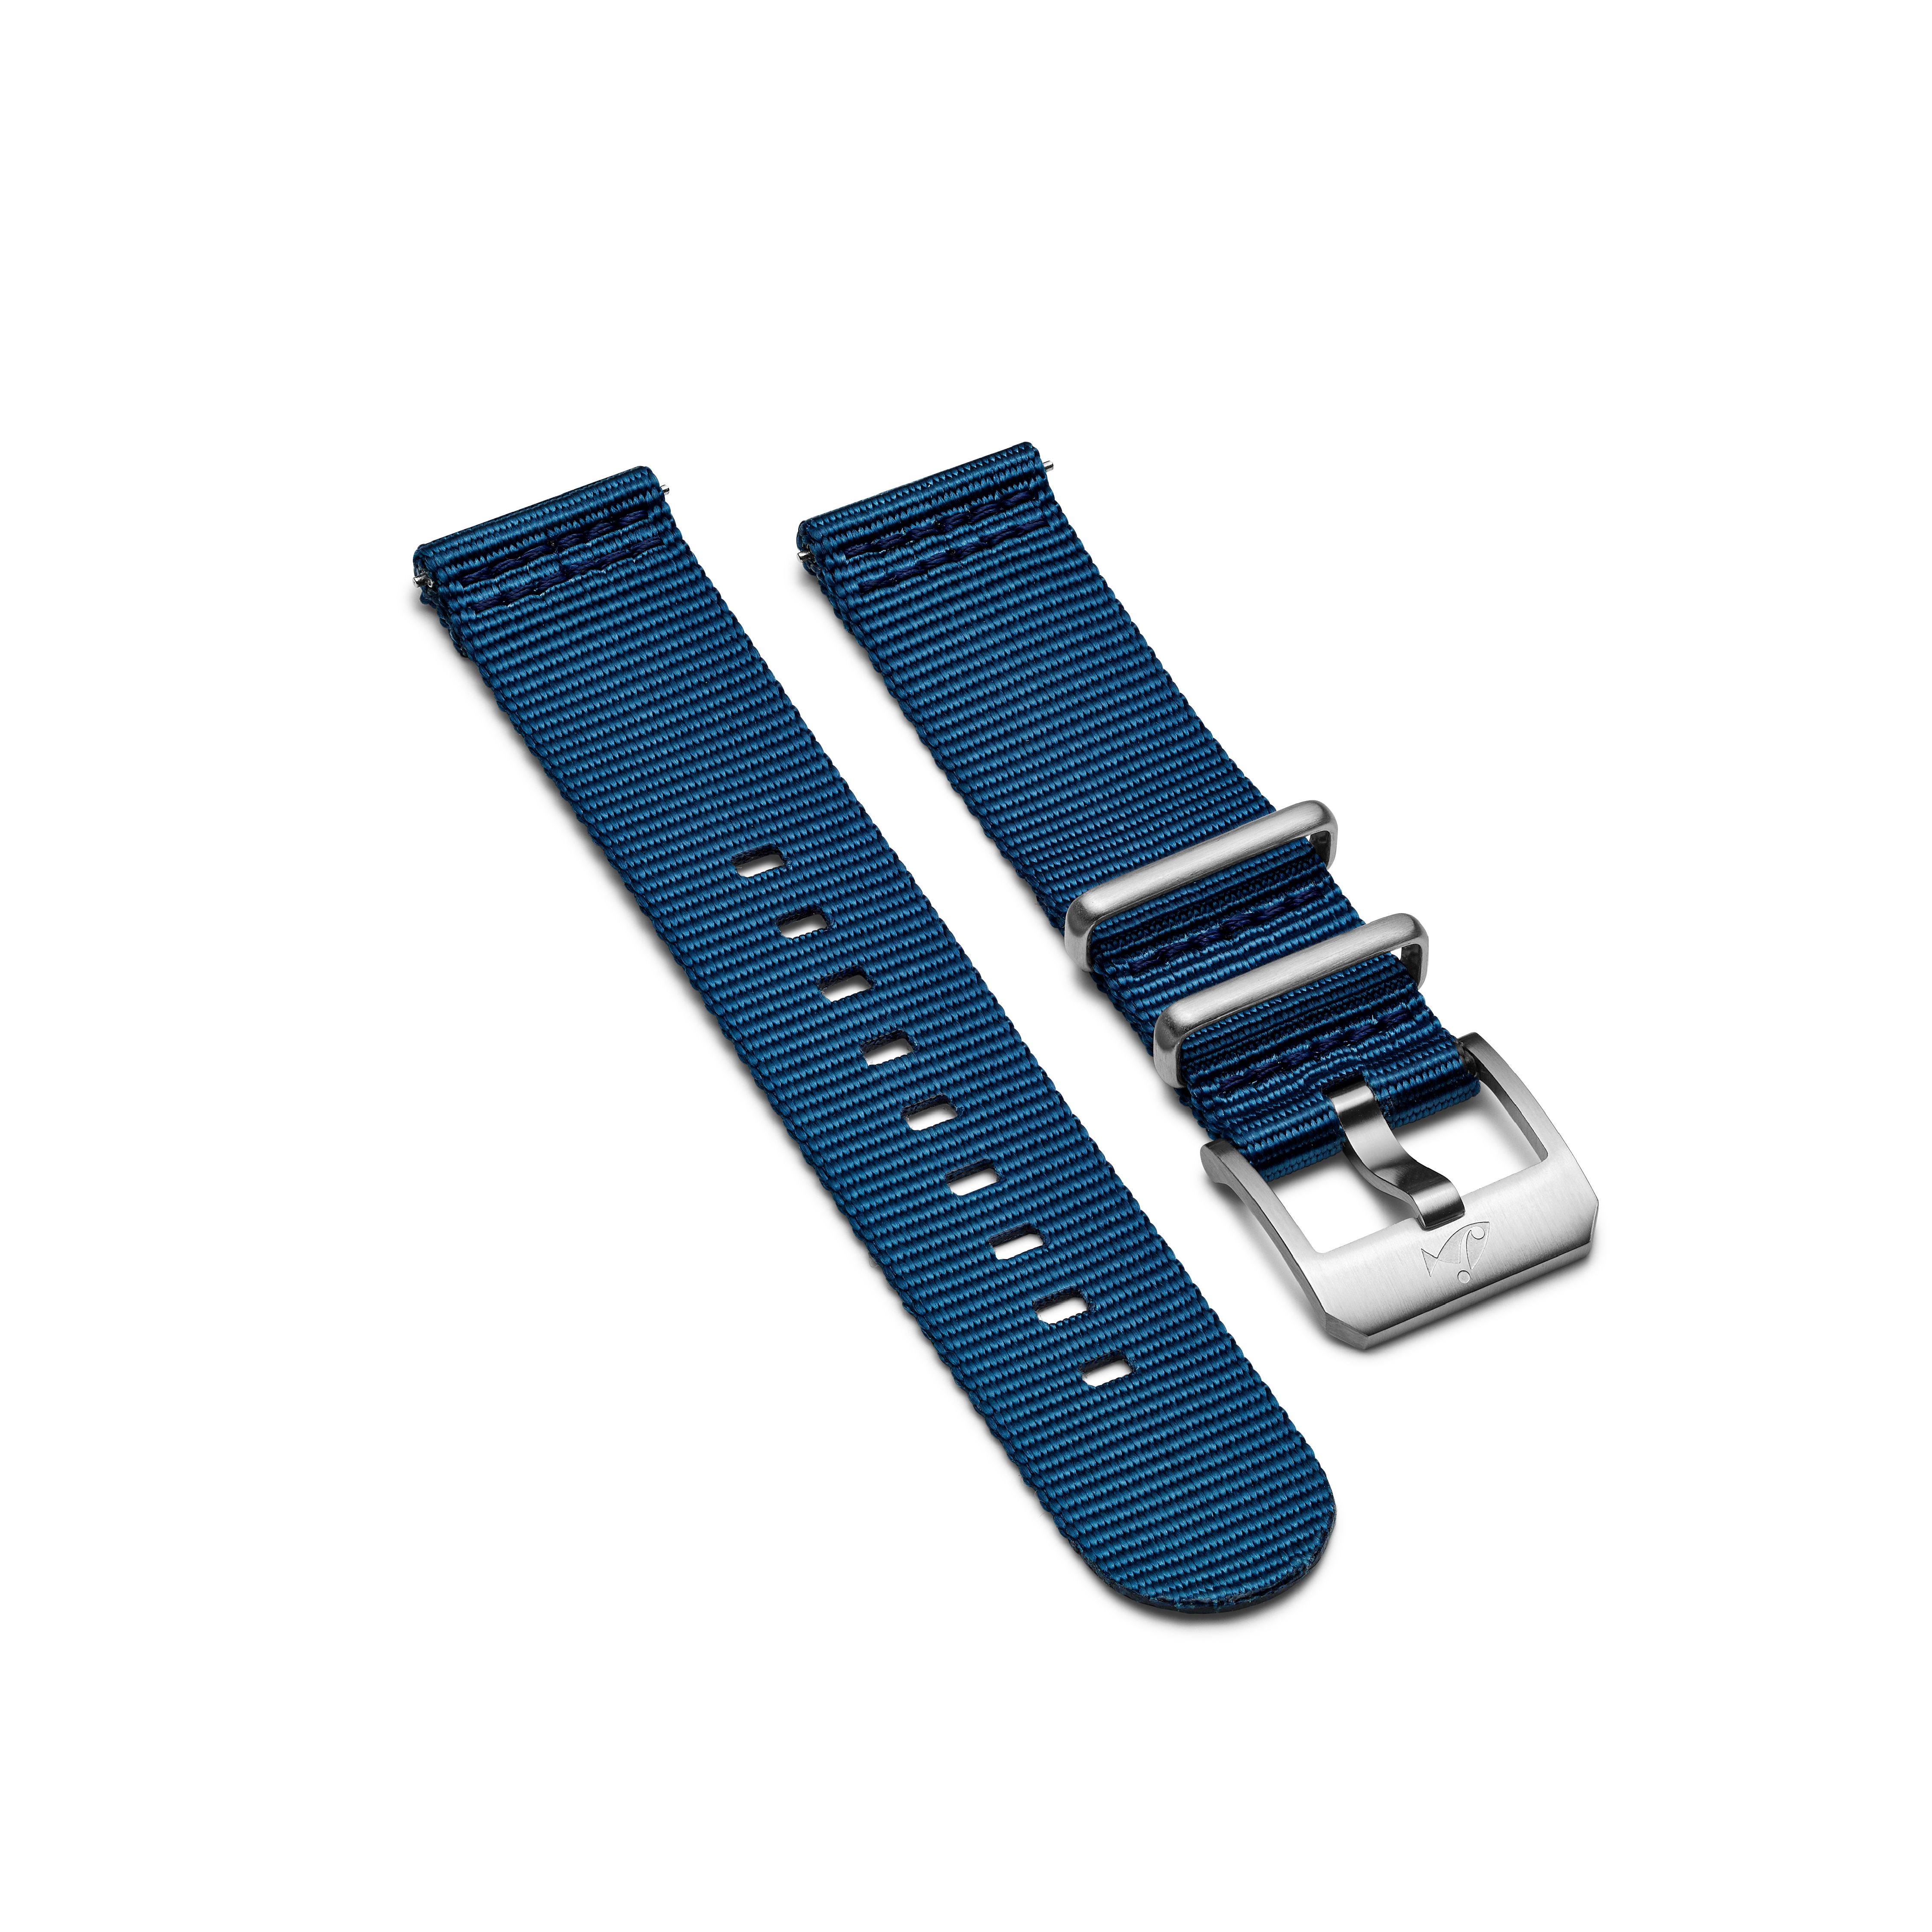 NATO strap with folding buckle, Navy blue